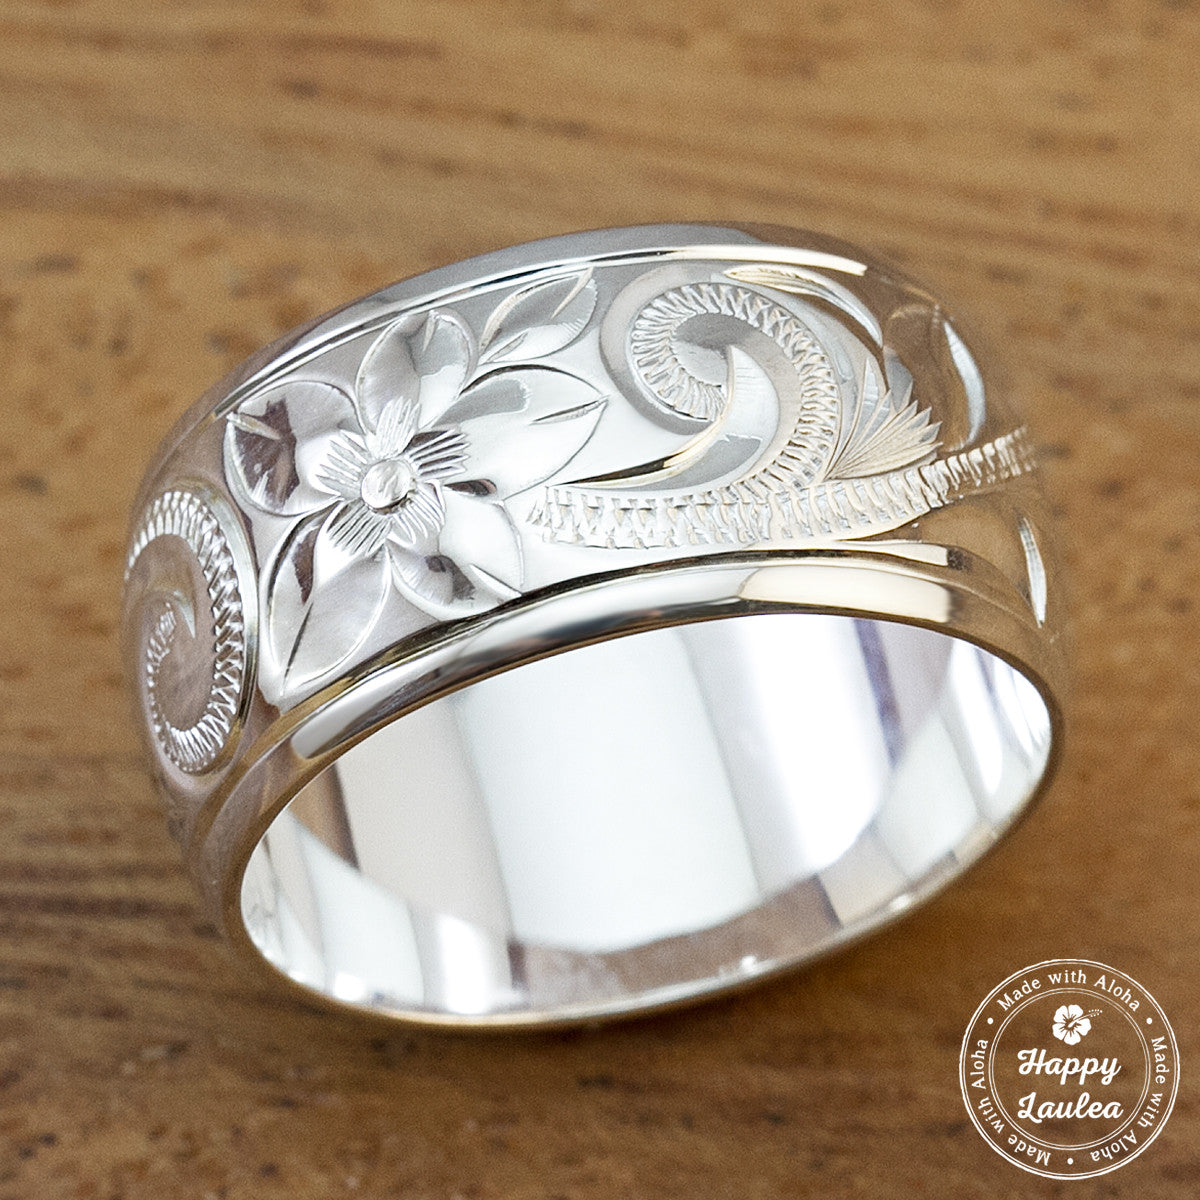 925 Sterling Silver Hand Engraved Old English Design Ring with Polished Edges - 10mm, Dome Shape, Standard Fitment